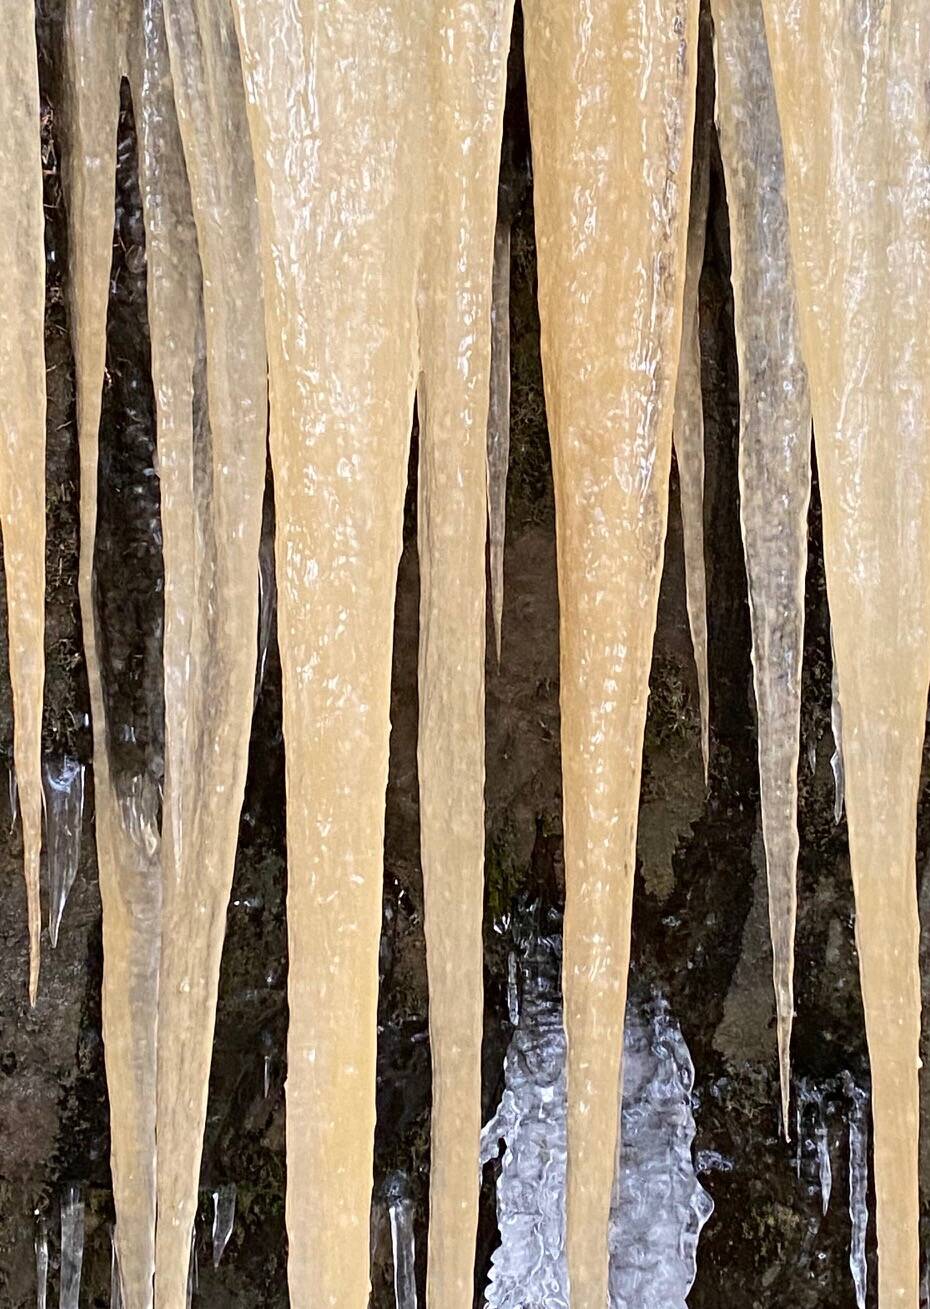 Tannin-tinted 8 ft. long icicles sharp as daggers on Treadwell Ditch trail. (Courtesy Photo / Denise Carroll)